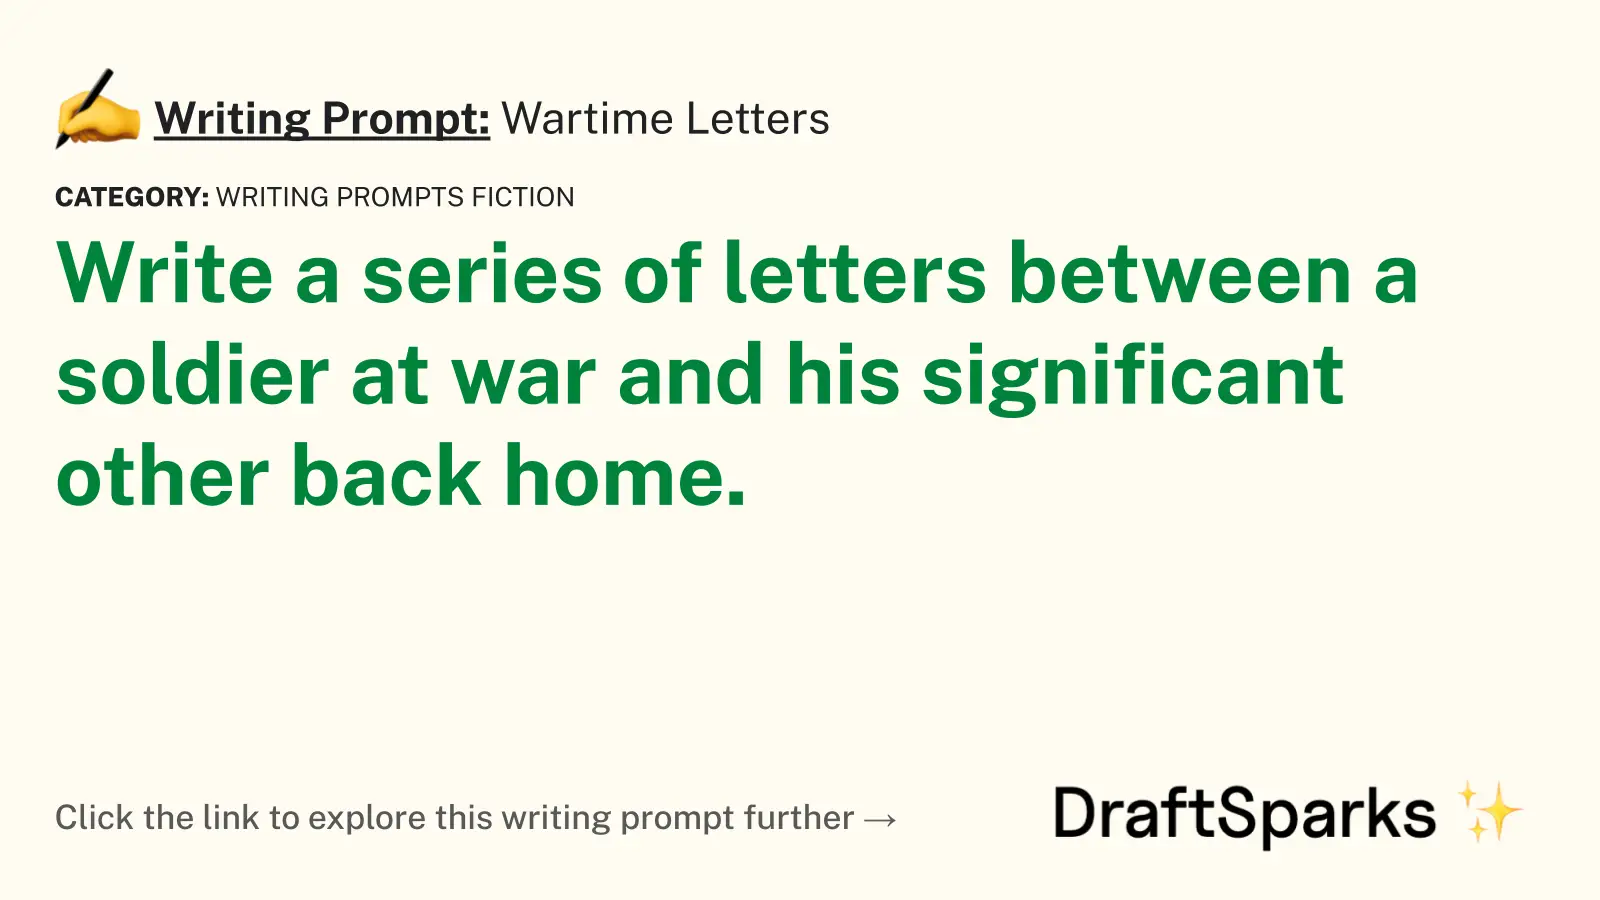 Wartime Letters